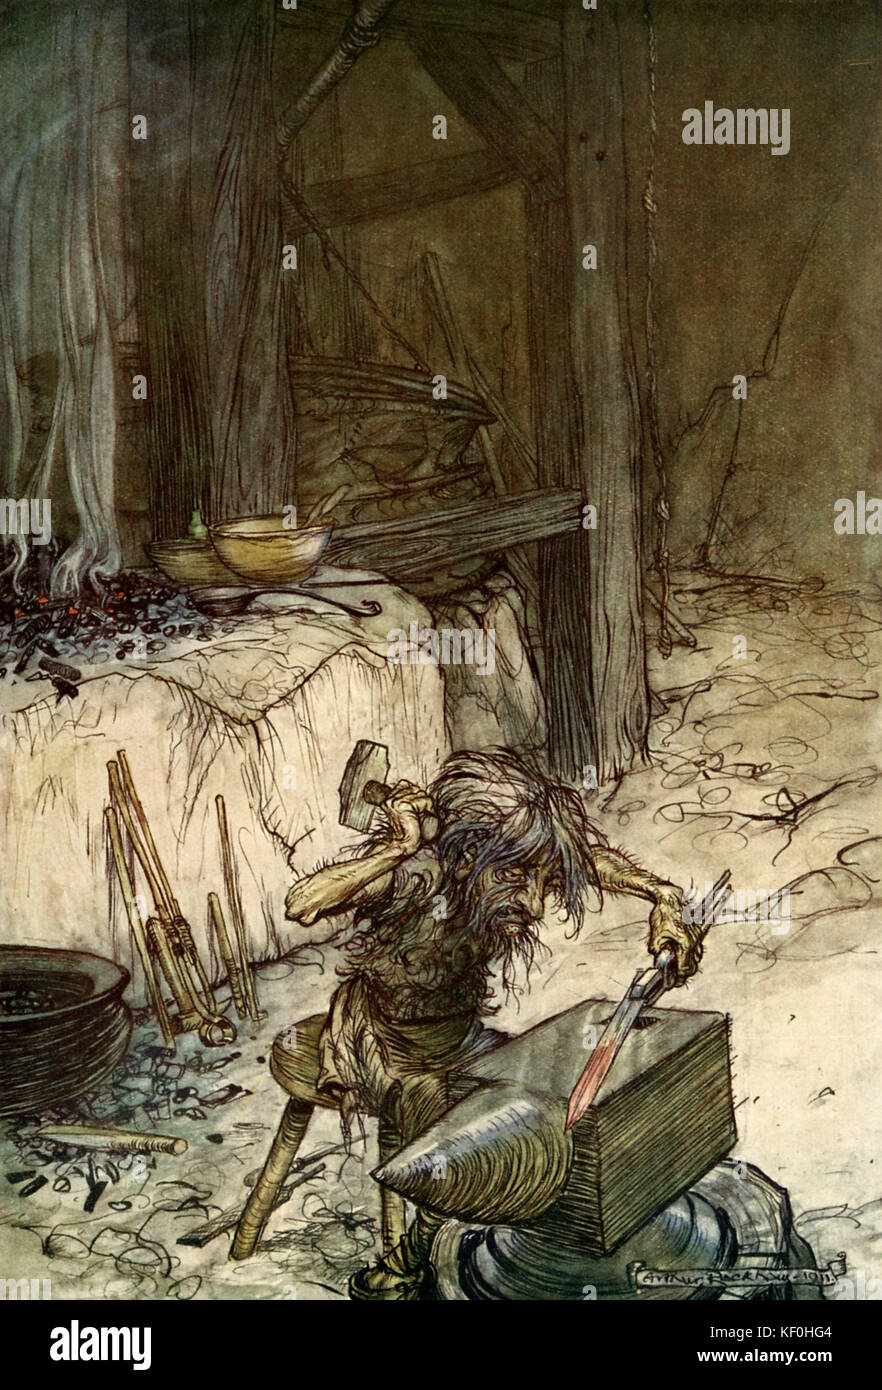 Siegfried by Richard Wagner. The dwarf Mime forges a sword.  Illustration by Arthur Rackham 1867 - 1939.  Caption:  'Mime at the anvil' Act 1.  From 'The Ring Cycle' / 'Der Ring des Nibelungen'.  RW German composer & author, 22 May 1813 - 13 February 1883. Stock Photo